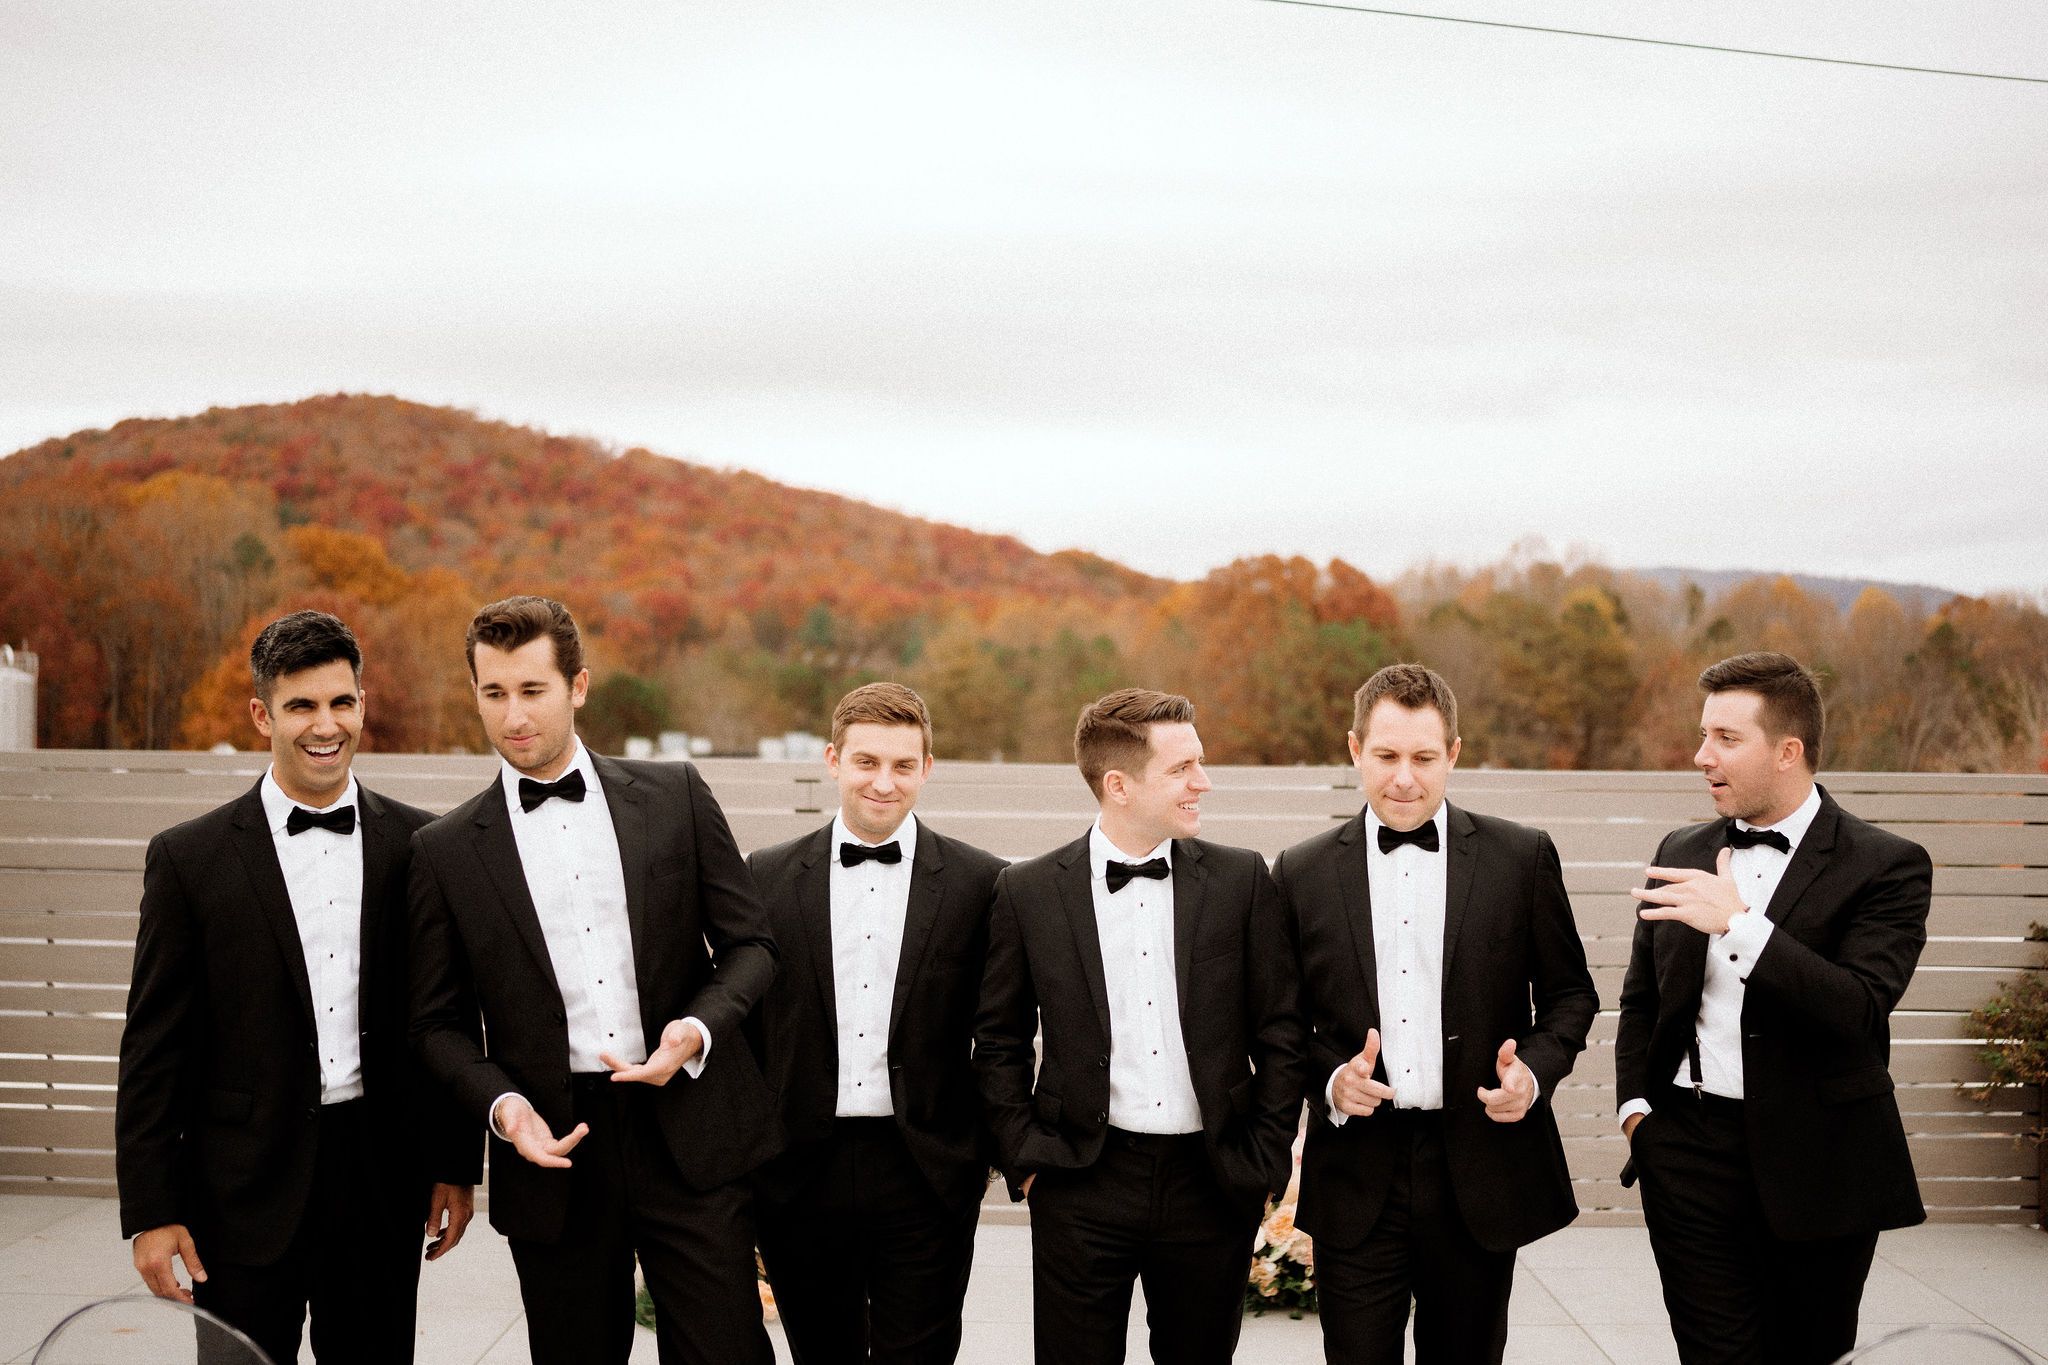 Groom and groomsmen suit and tuxedo rentals from Generation Tux